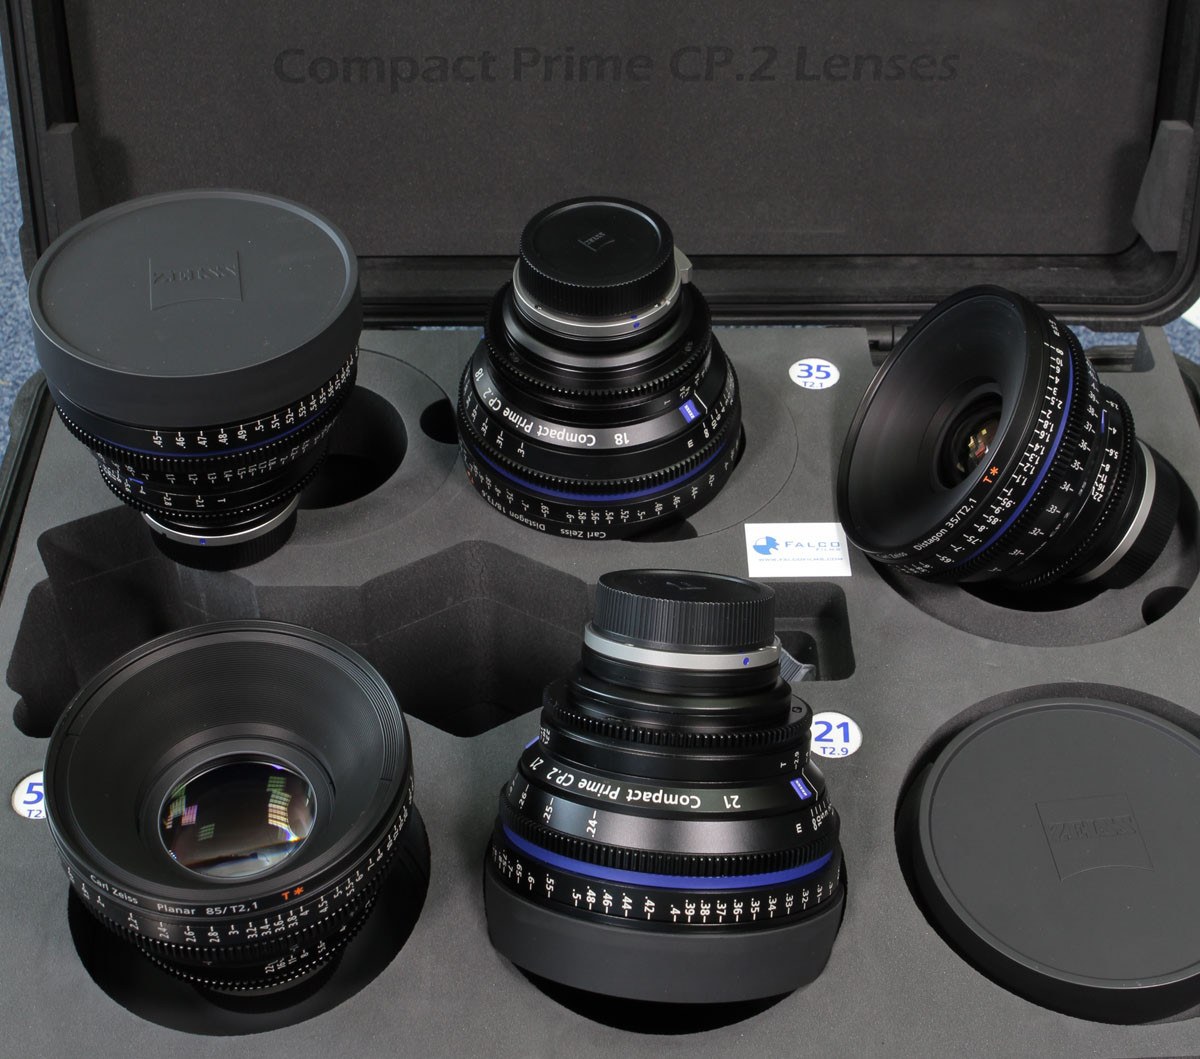 ZEISS Compact Prime CP.2 18mm T3.6